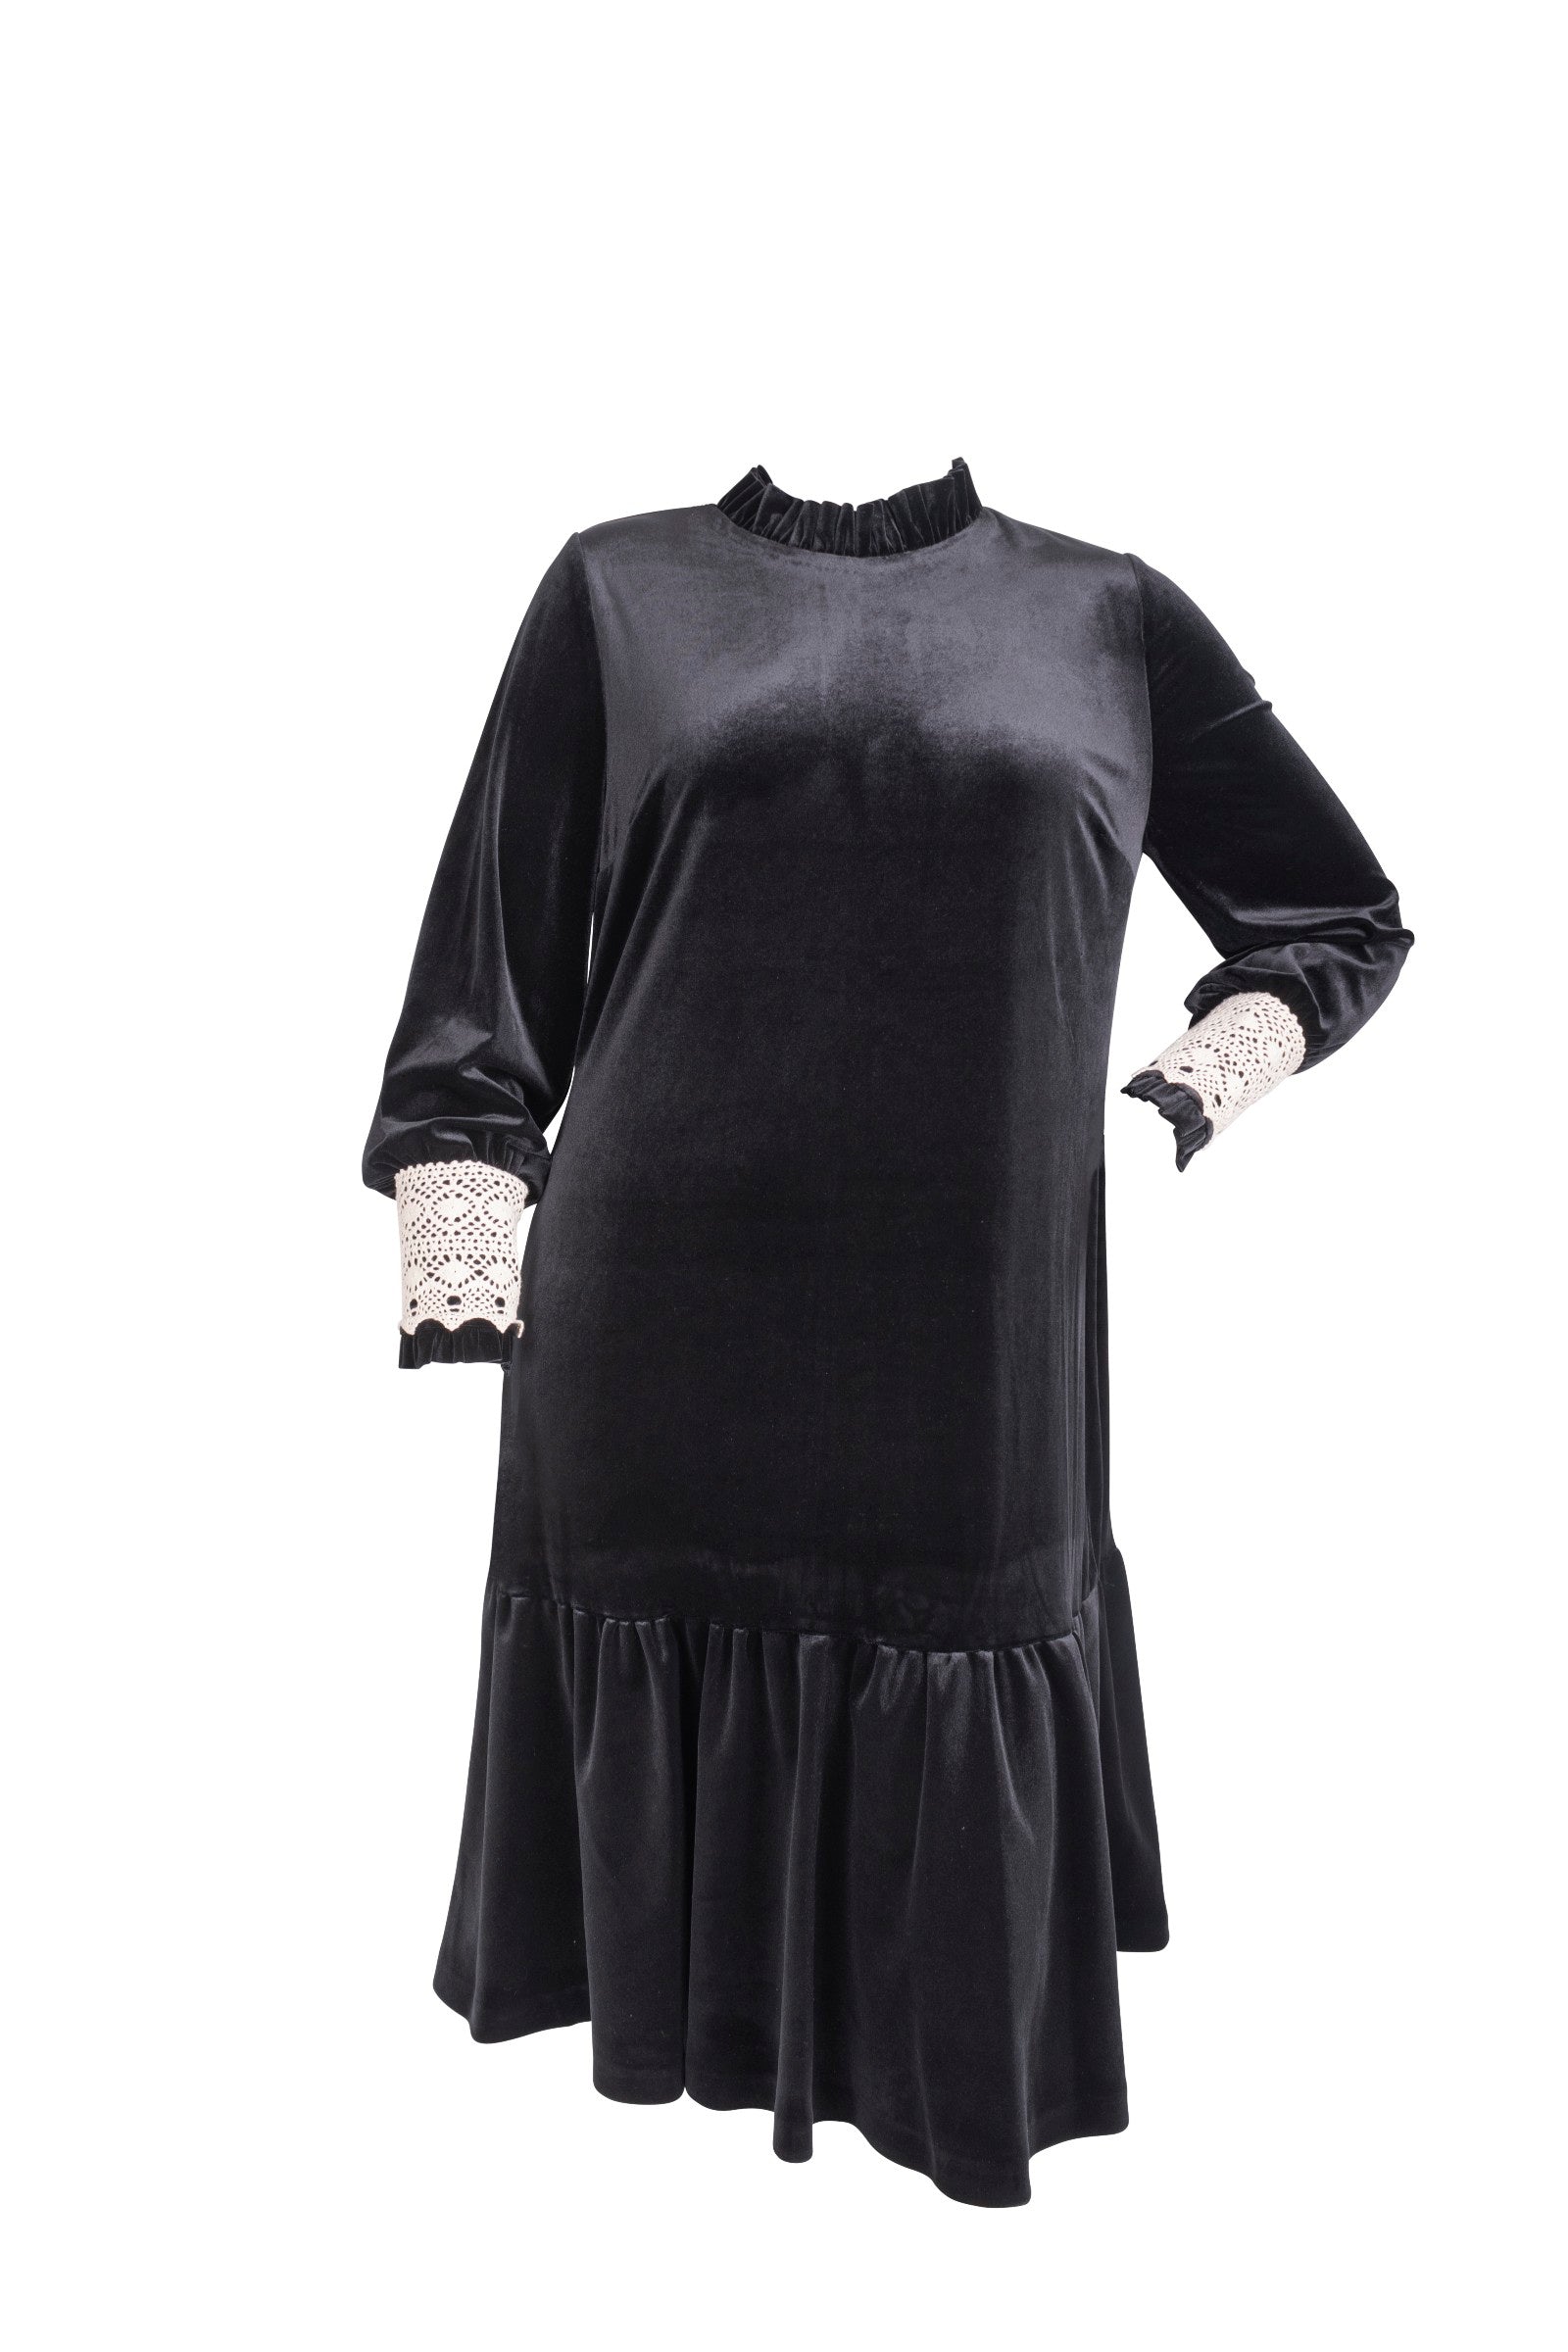 BLACK VELOUR DRESS WITH LACE CUFFS